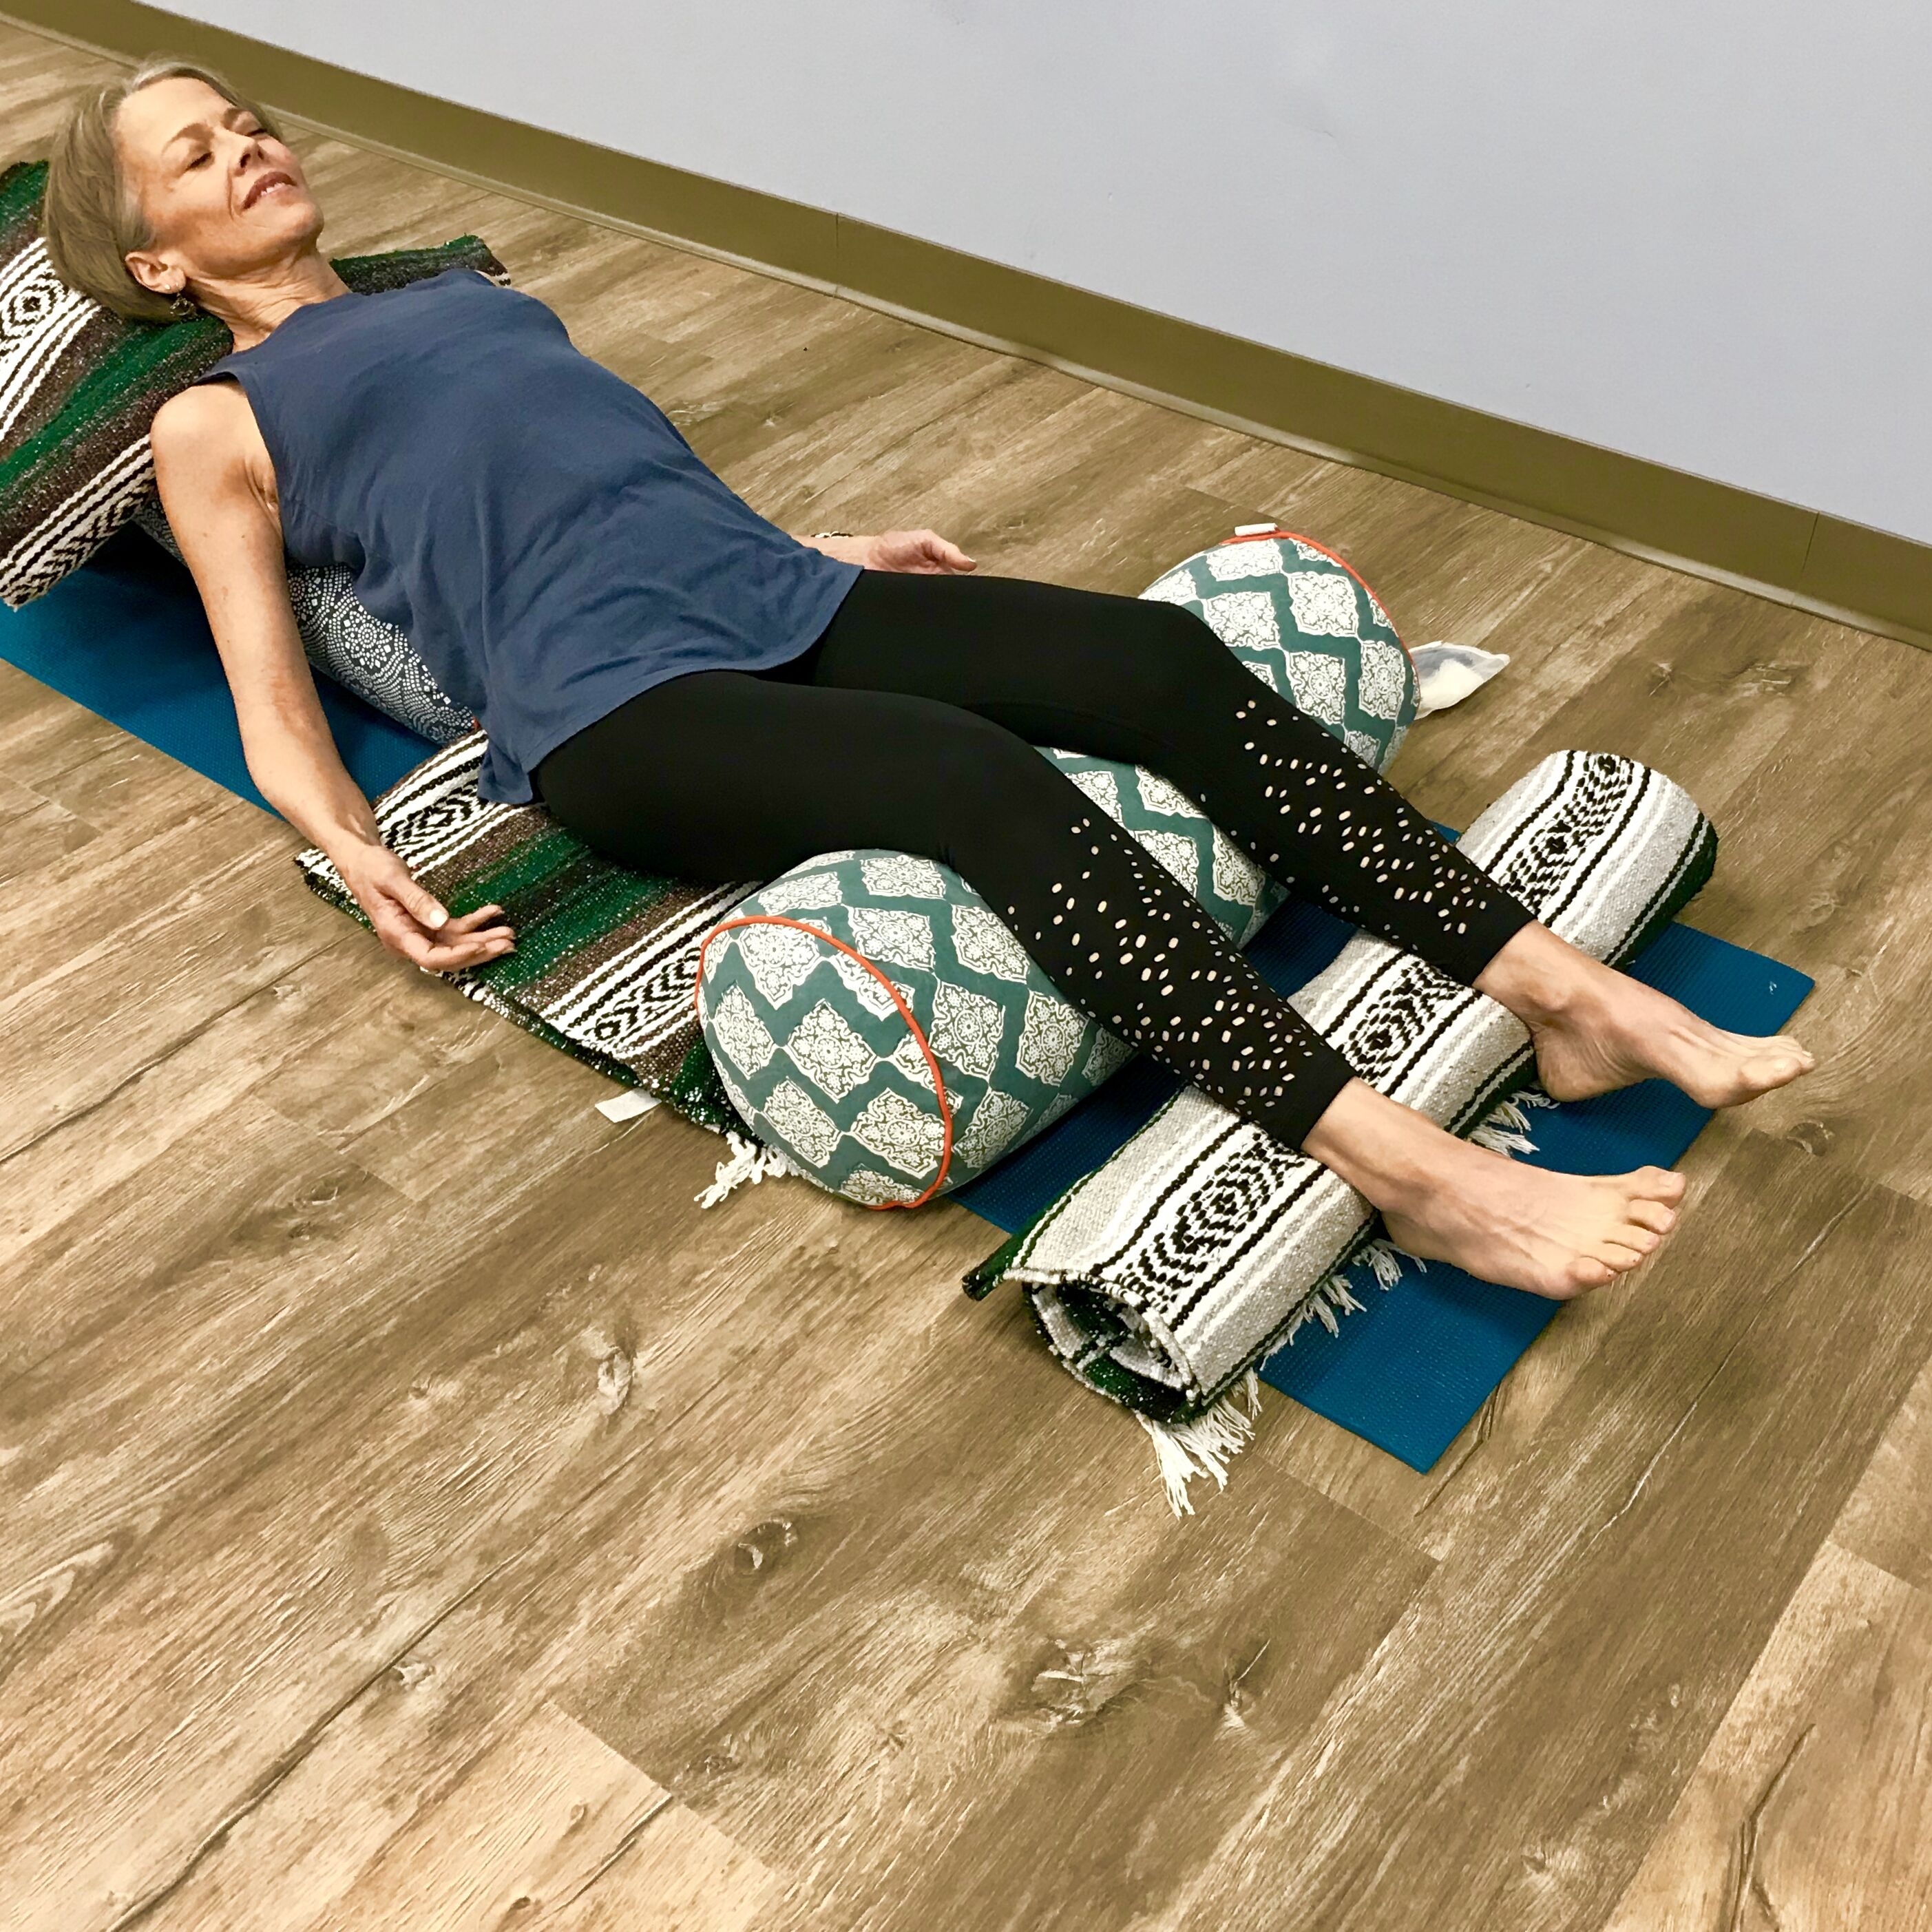 Moya McGinn Mathews demonstrates in a restorative yoga heart opener reclined on a bolster with knees supported on another bolster.